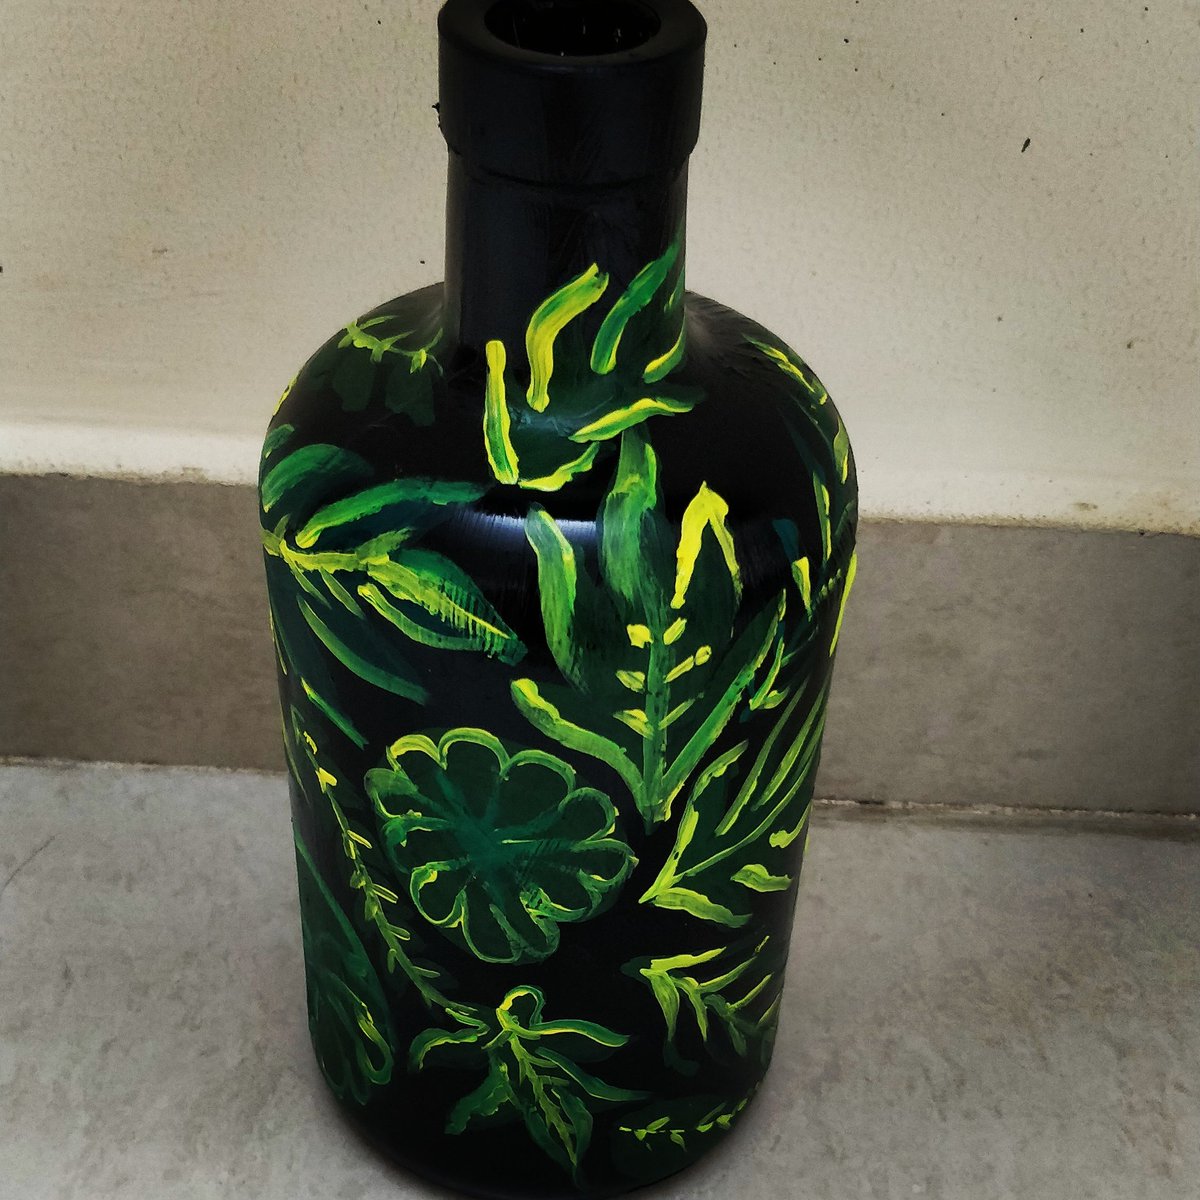 Did something different today #bottlepainting #somethingdifferent #artsncraft #artistsontwitter